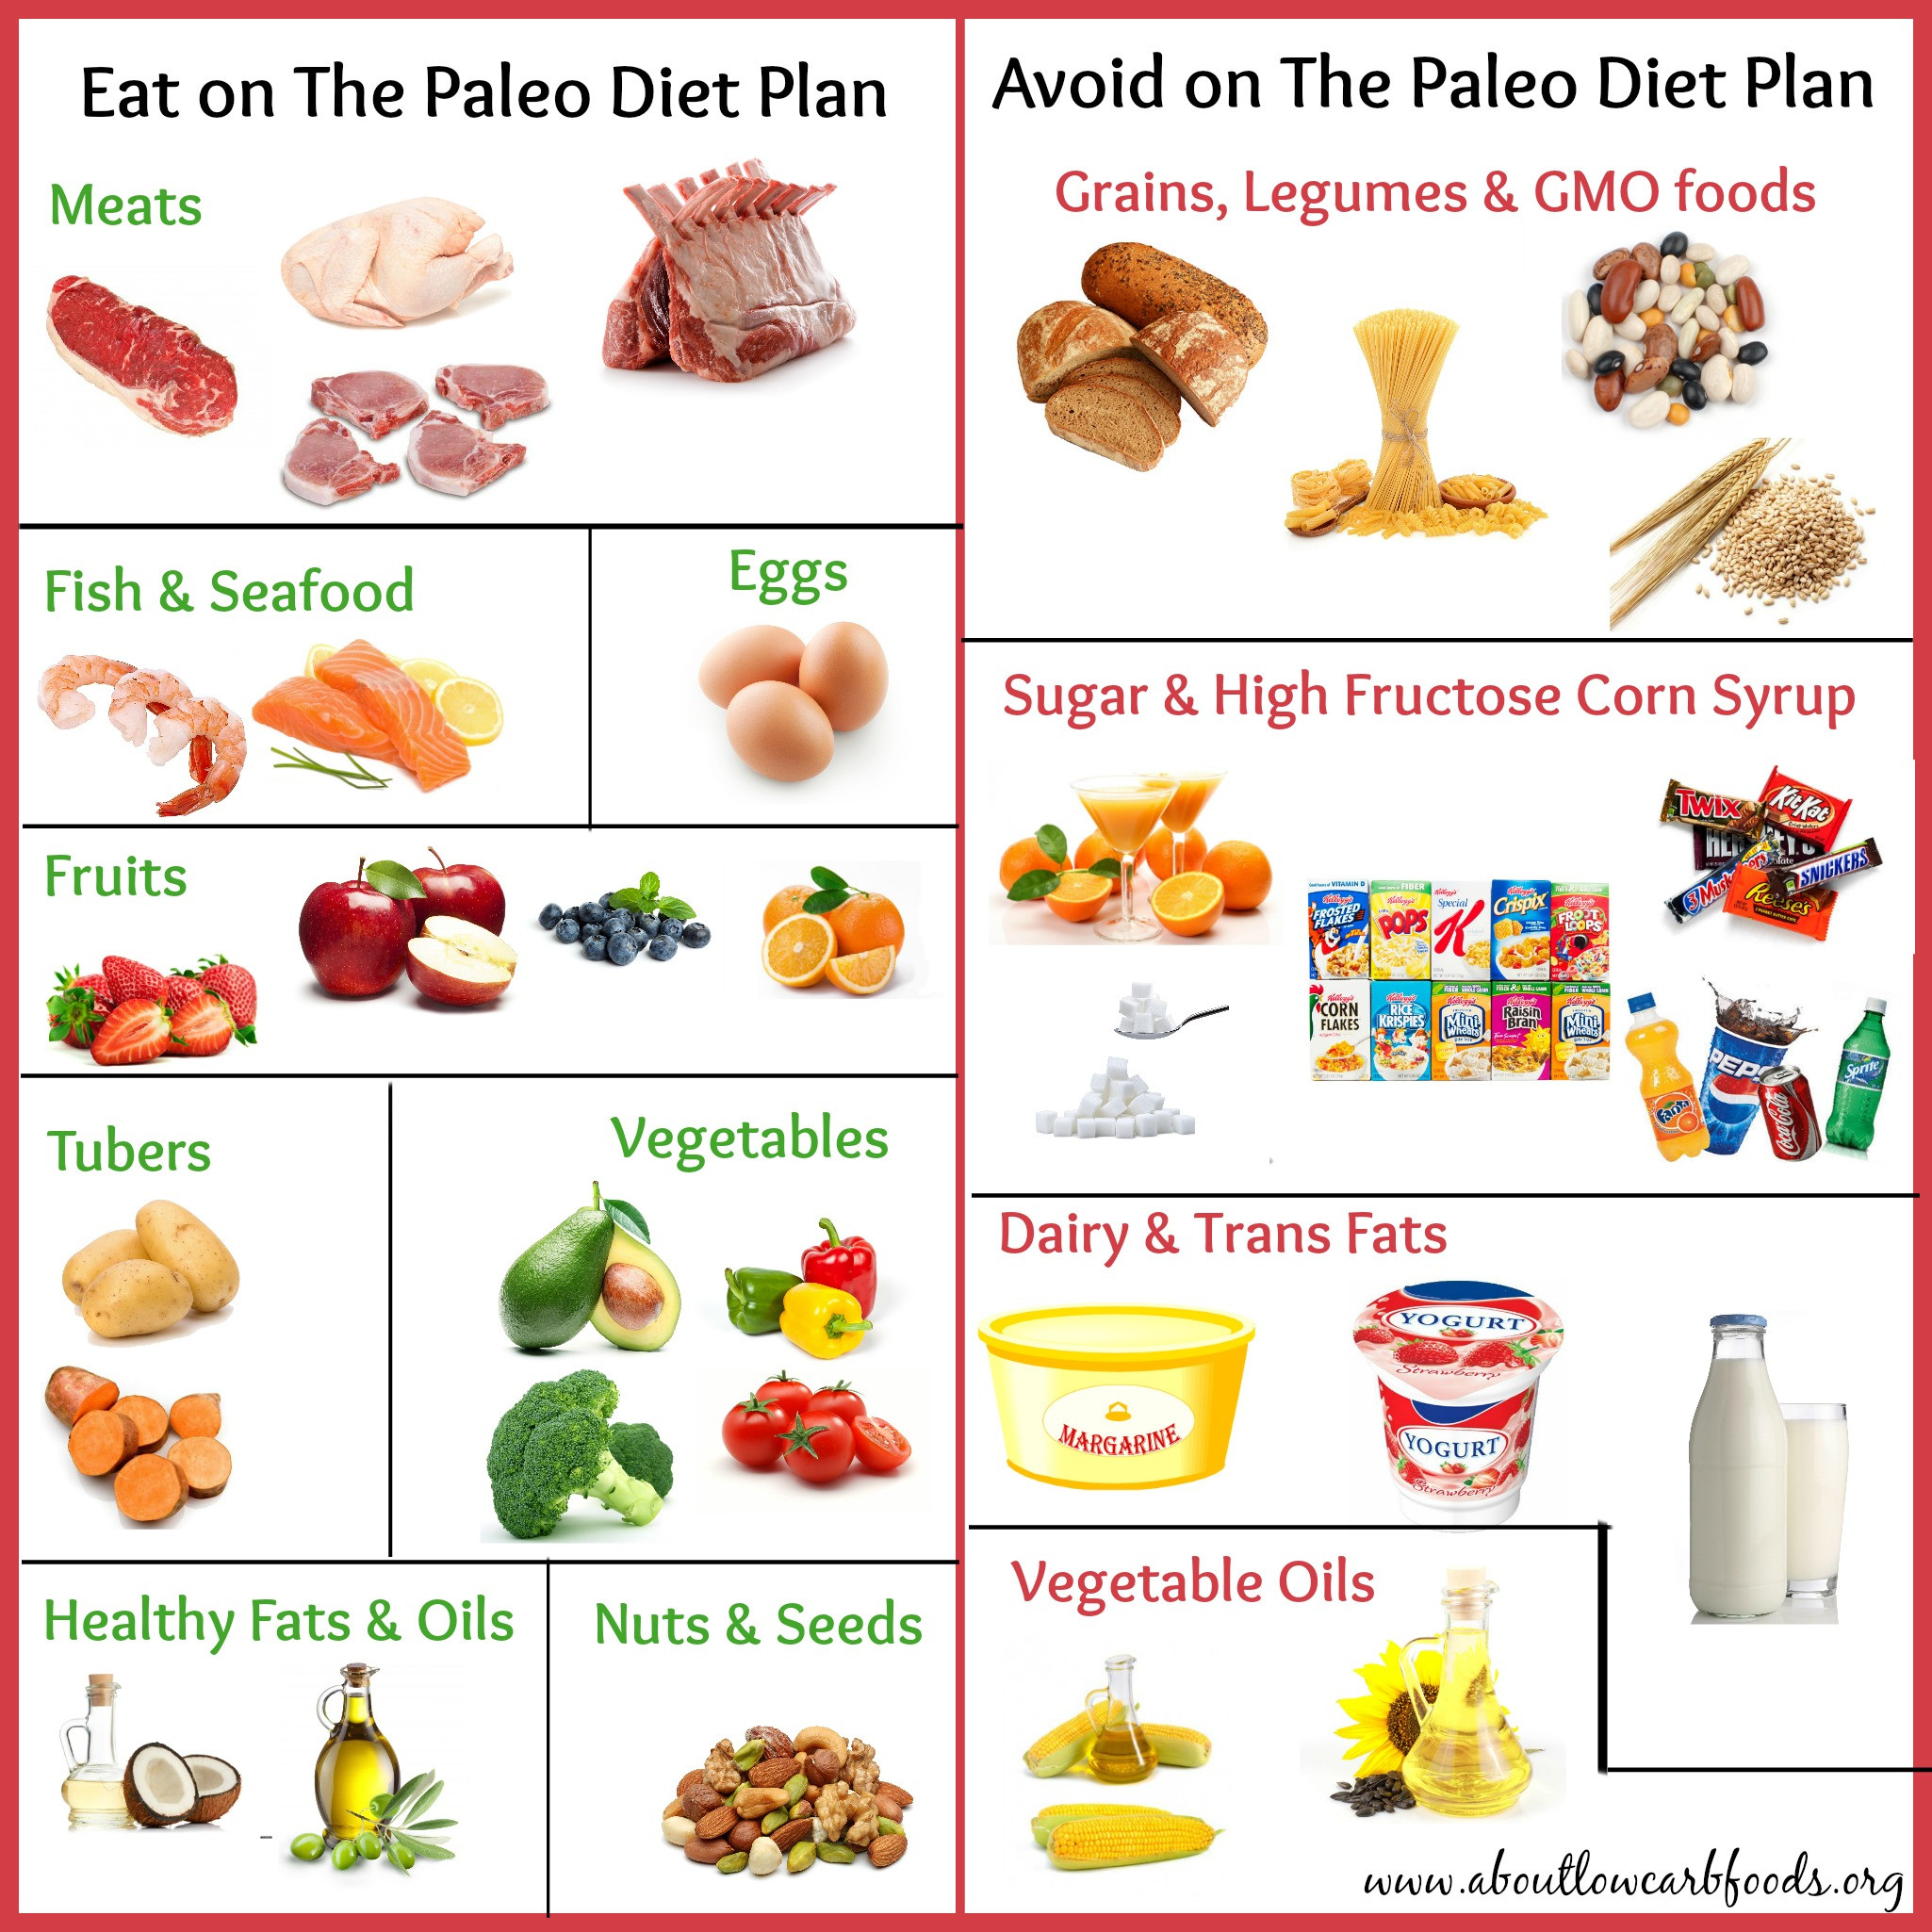 Paleo Diet Food Plans
 Paleo Diet Meal Plan Why It’s So Popular About Low Carb